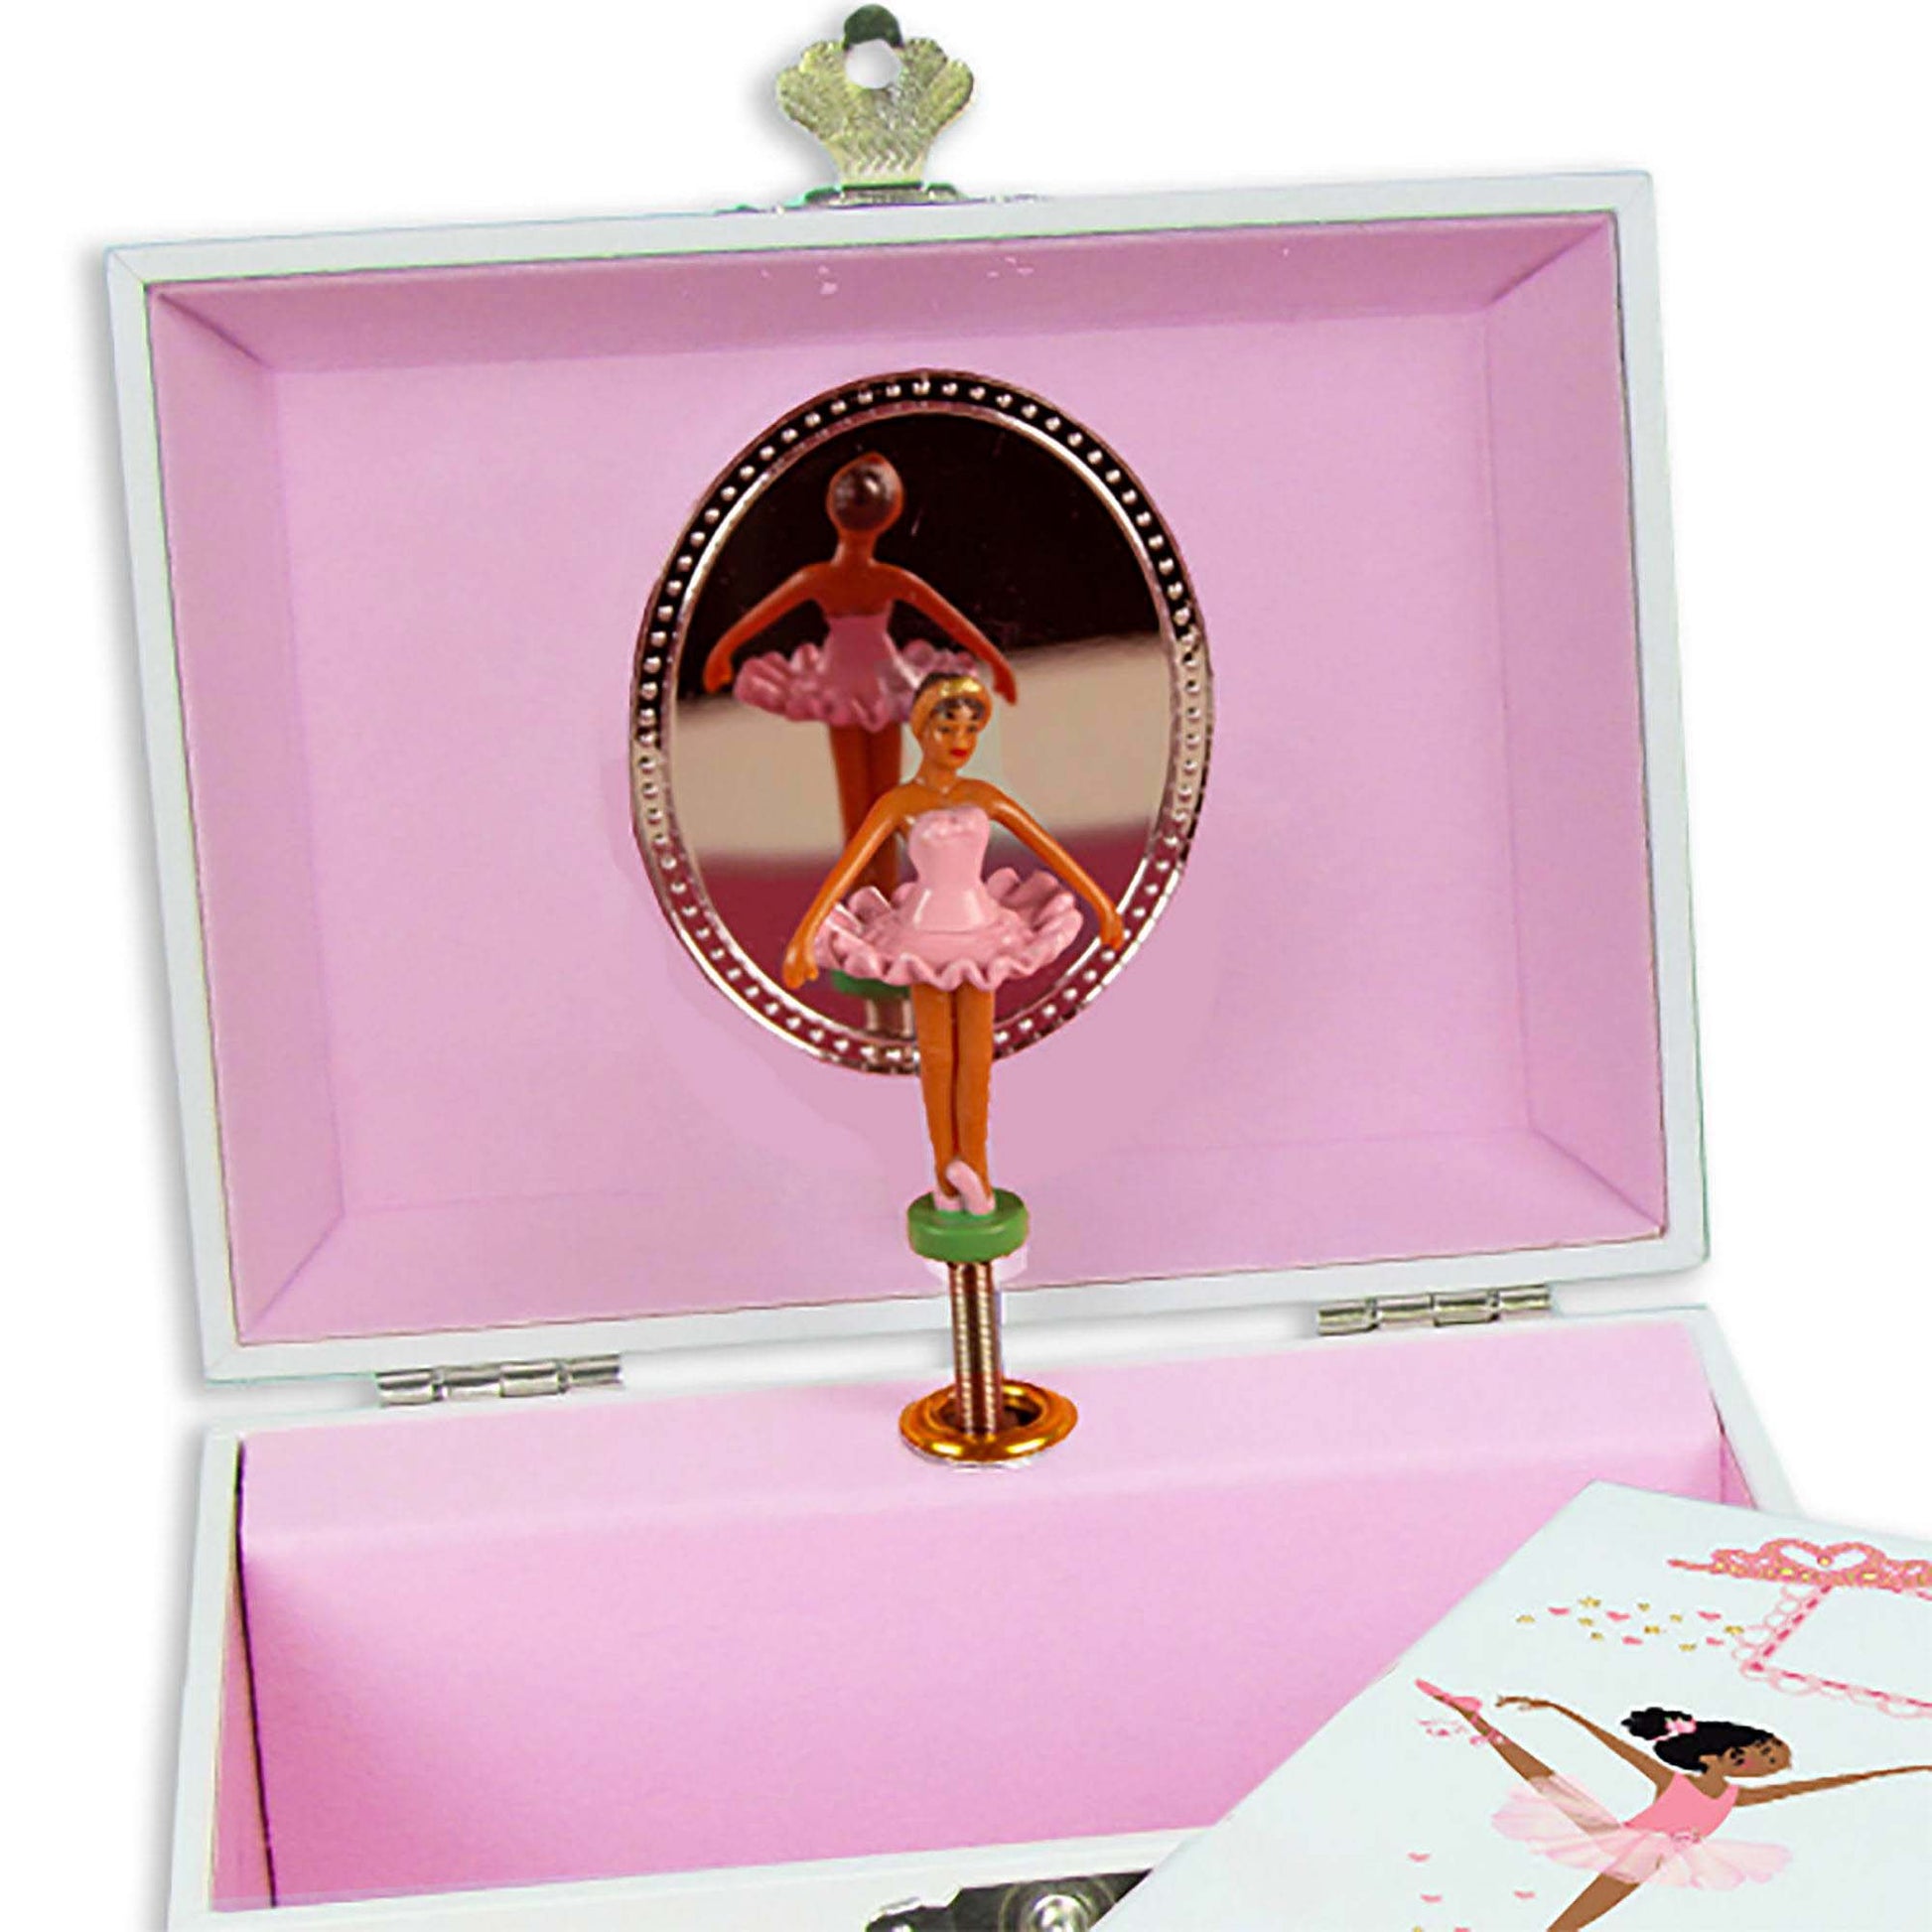 Personalized Ballerina Jewelry Box with Pastel Butterflies design